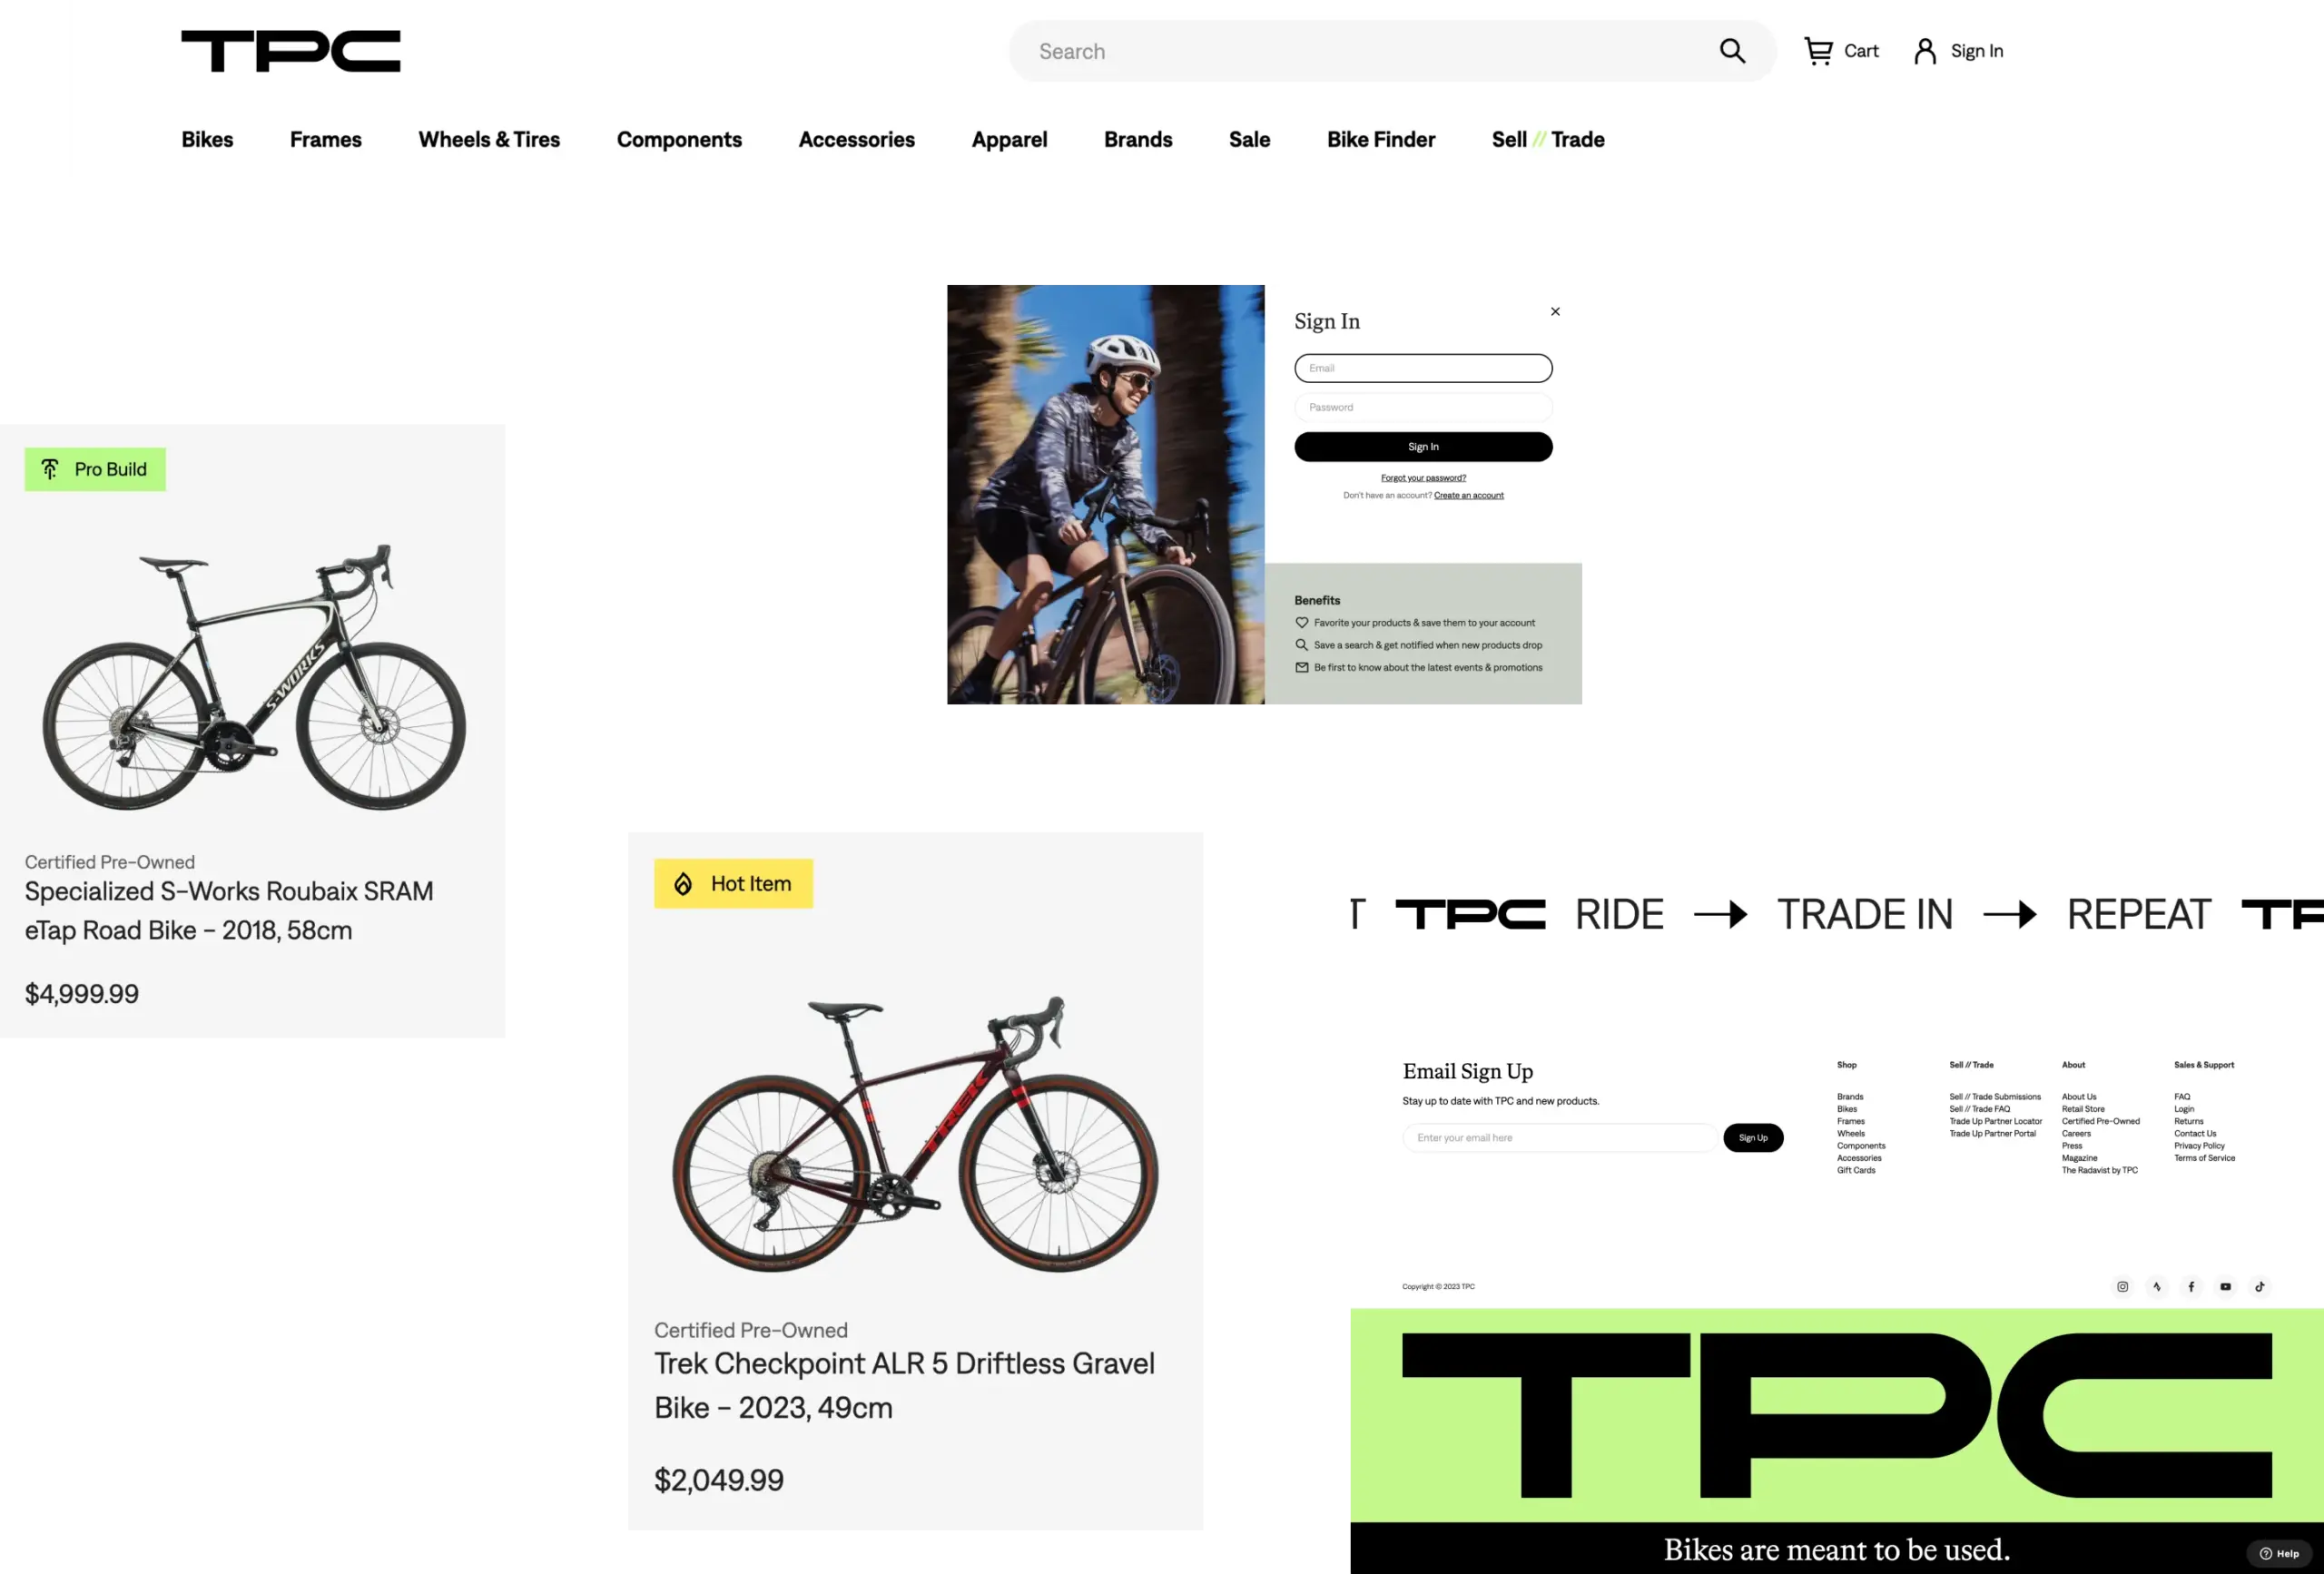 Collection of various UI elements for TPC's website